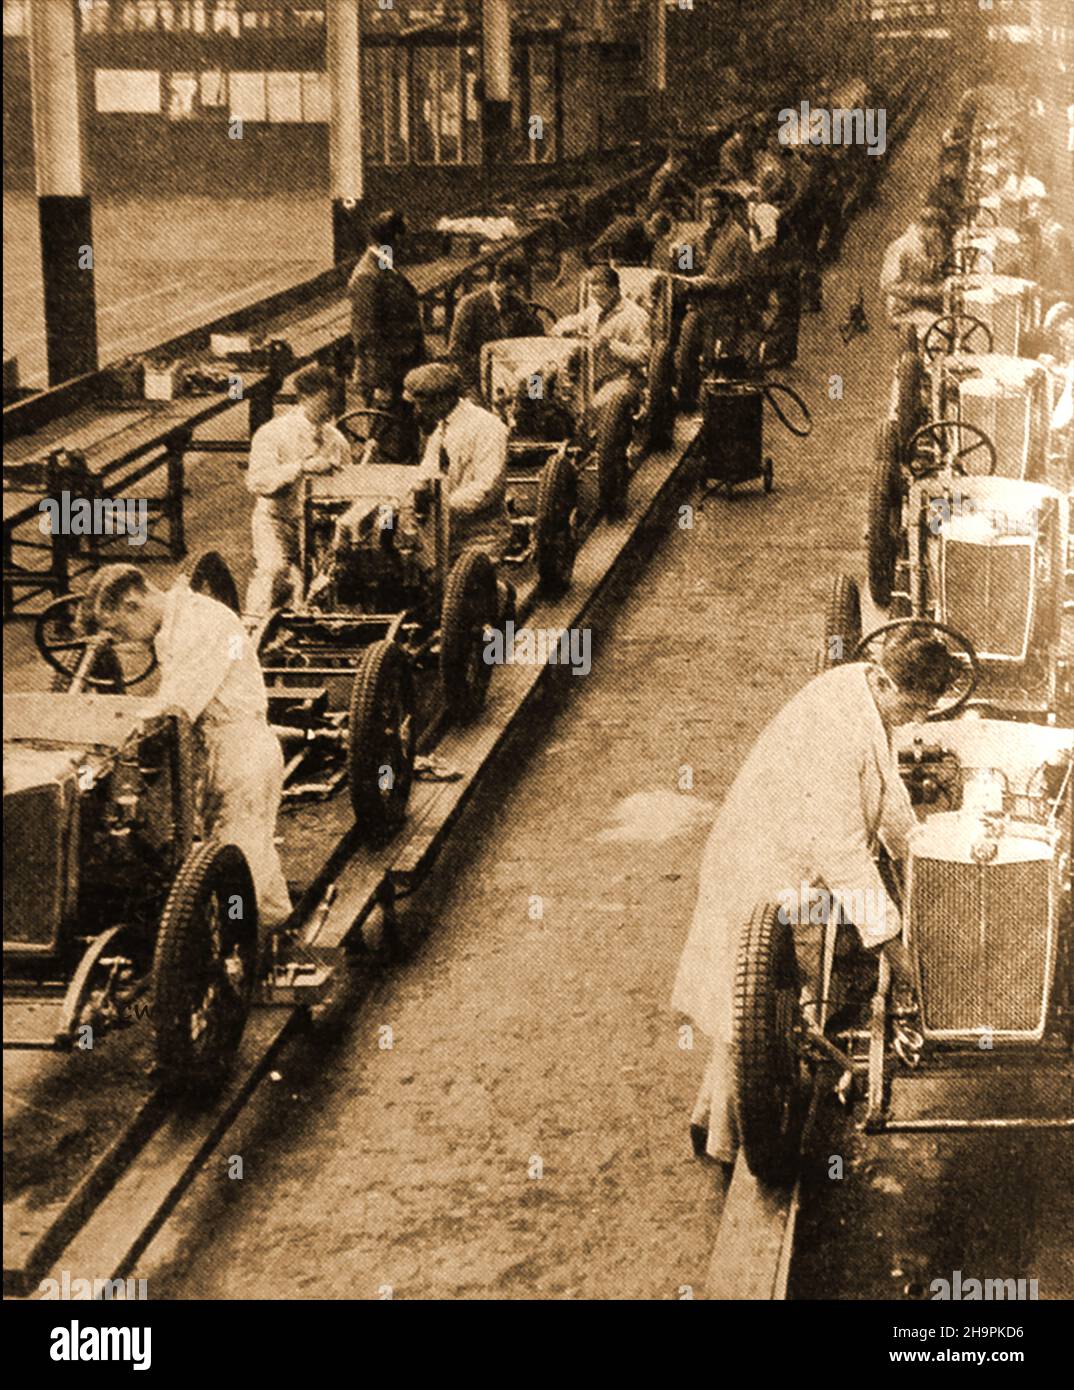 A production line scene in the old MG production works,.MG stands for Morris Garages - the initials pay homage to car manufacturer  William Morris. Morris who owned the garages where MG's founder Cecil Kimber originally worked. Stock Photo